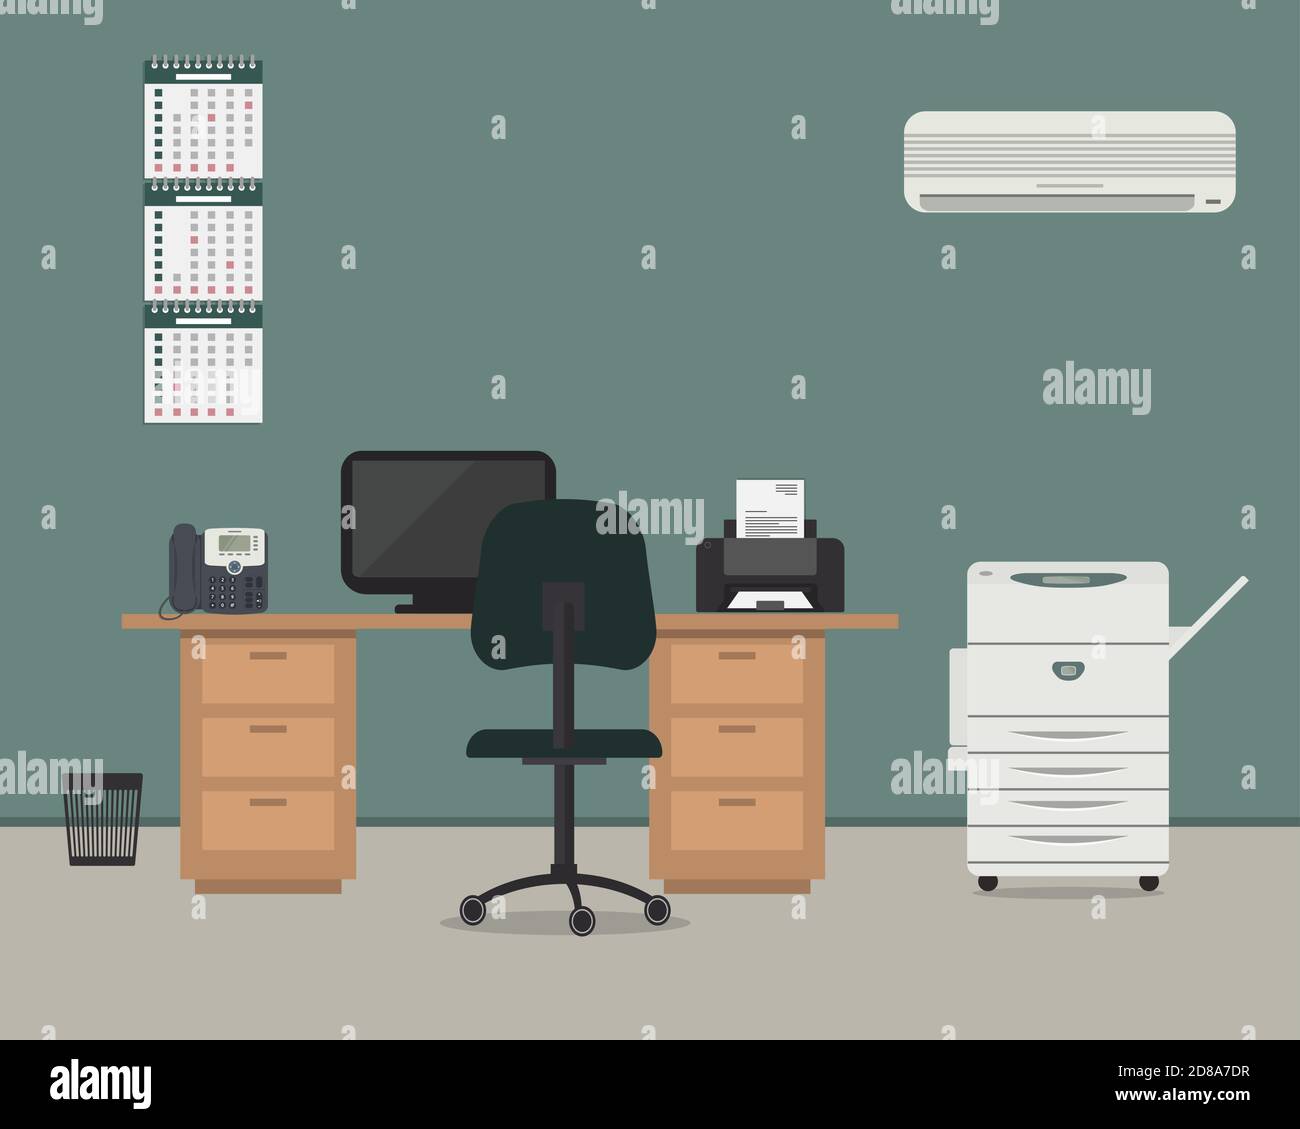 Office room in a green color. Workplace for office worker with furniture. There is a desk, a chair, a phone, a printer, air conditioner, copier Stock Vector